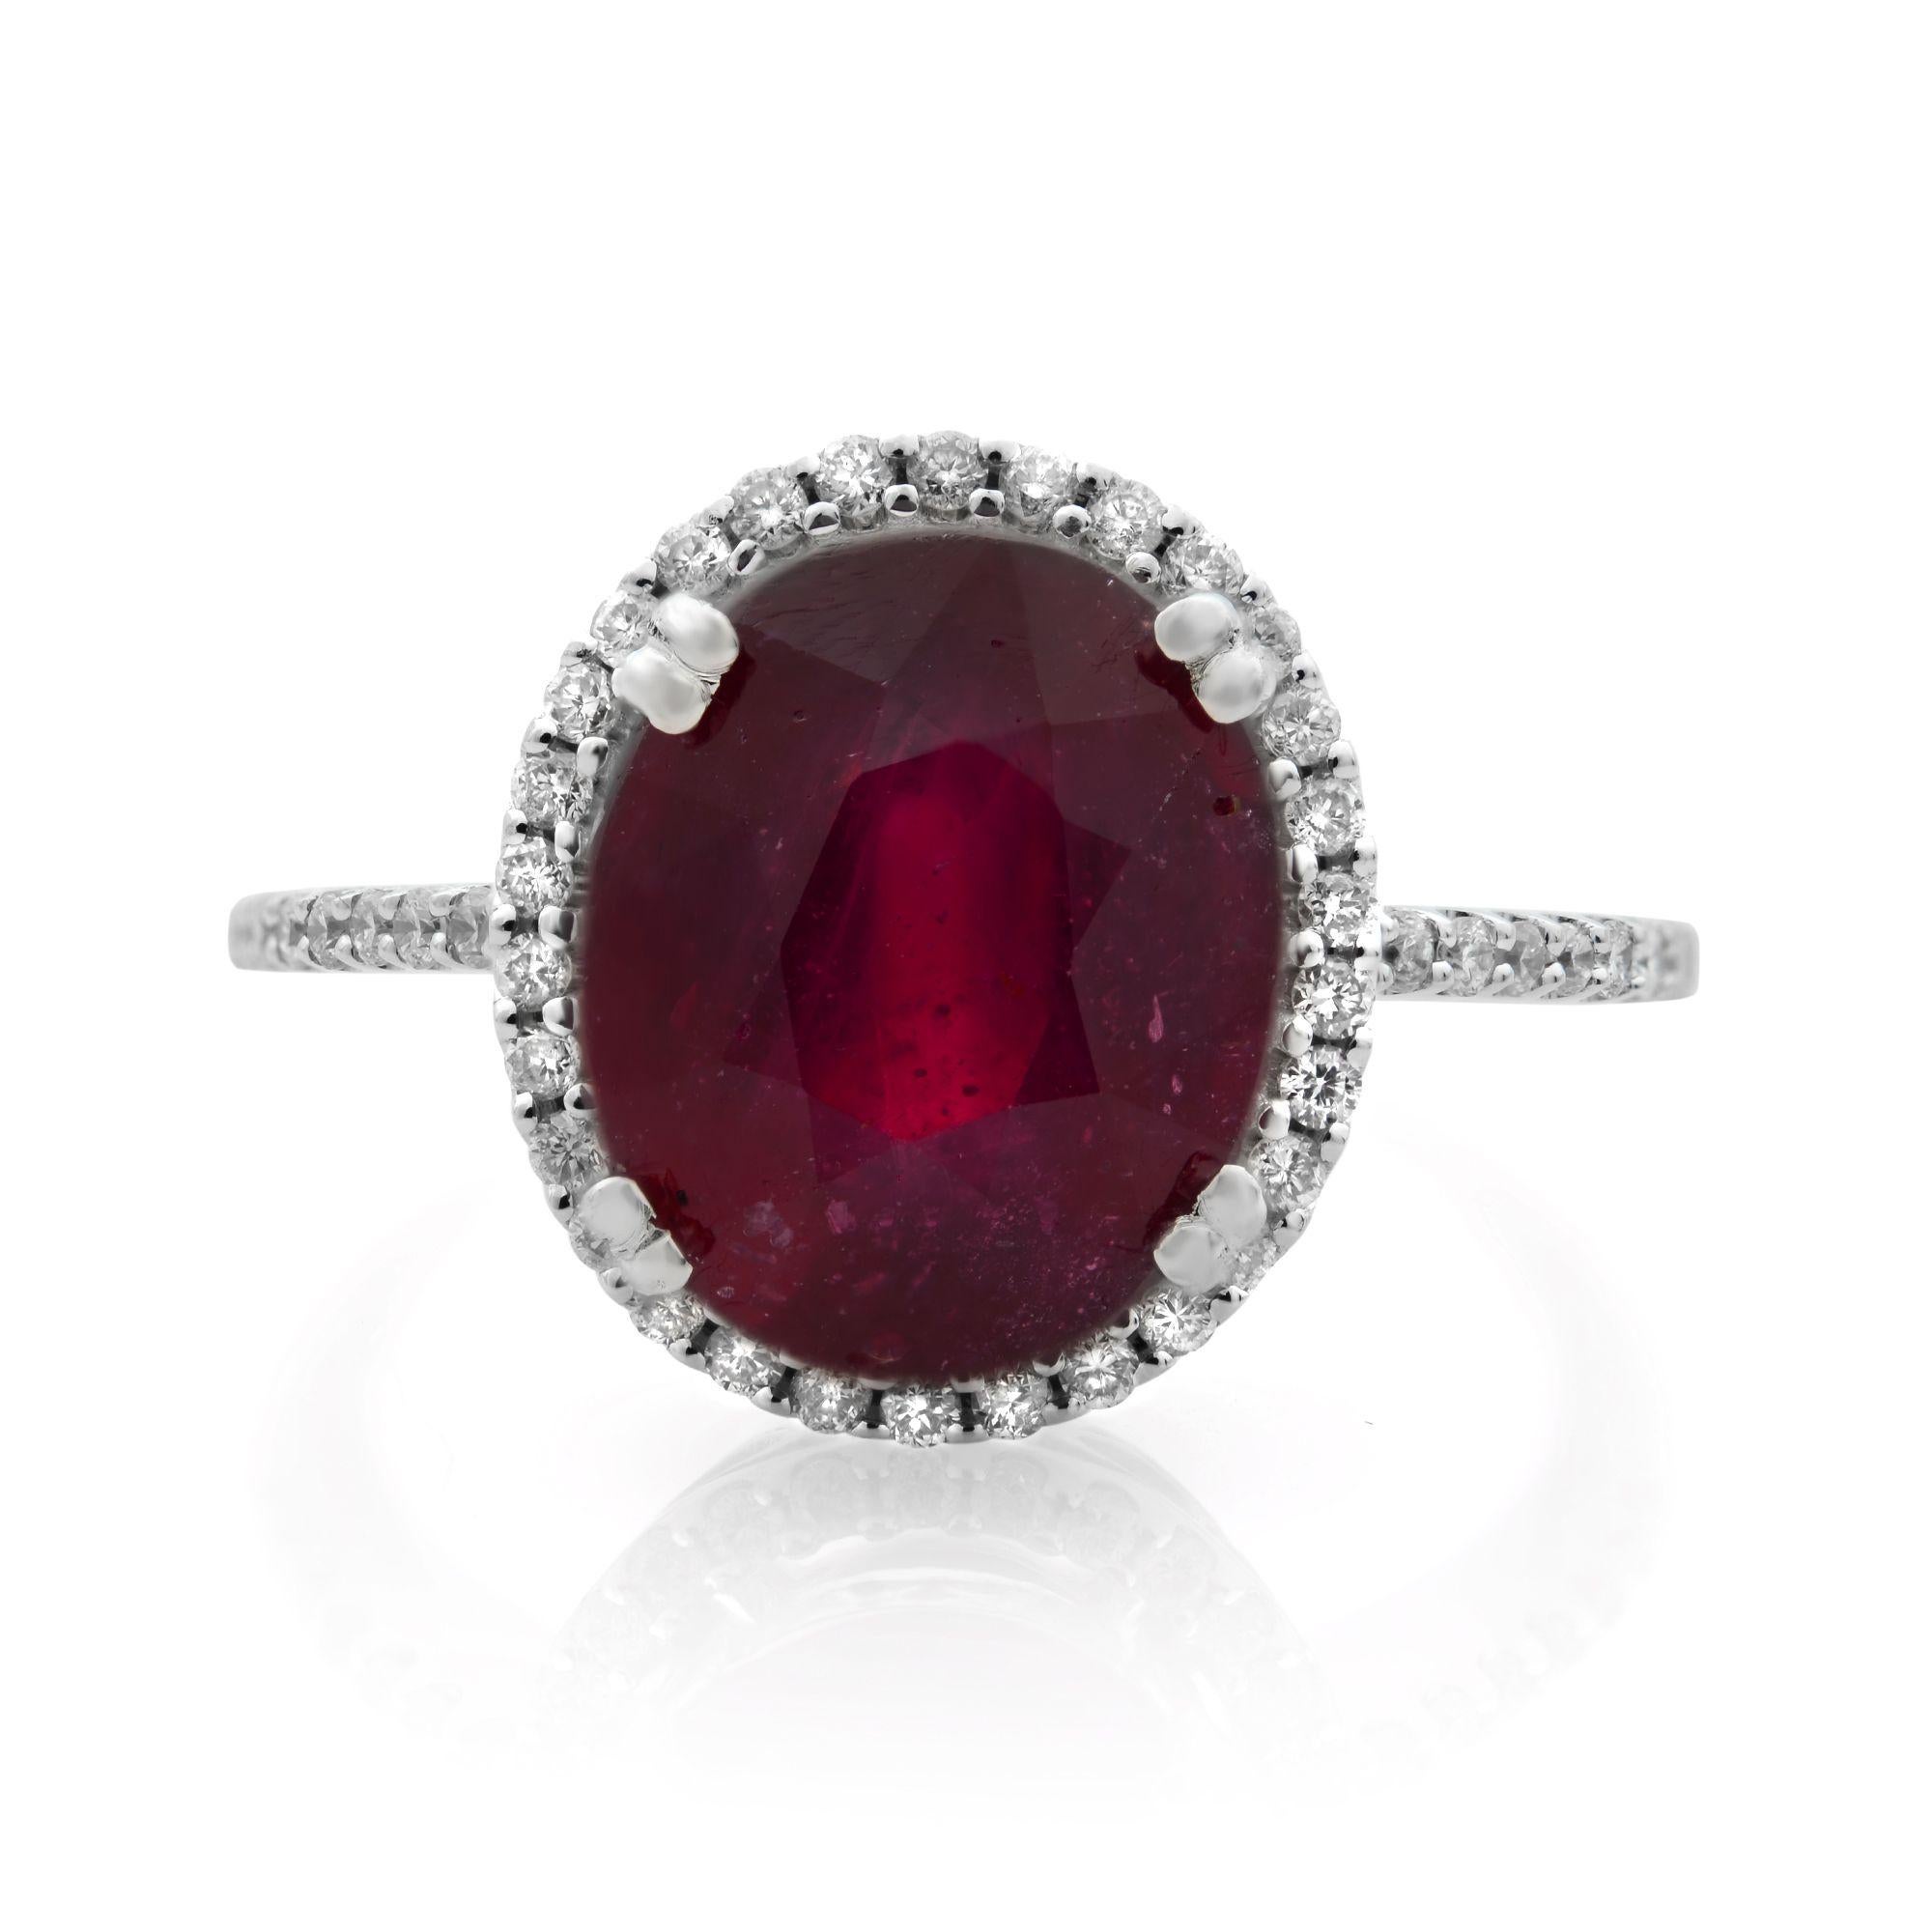 The beautiful 3.60 carat ruby catches attention with its bold red hue. Brilliant diamonds of 0.22 carat form a halo around the oval gem and adorn the shank of this timeless 14k white gold engagement ring. Diamond color G and SI2 clarity. Ring size